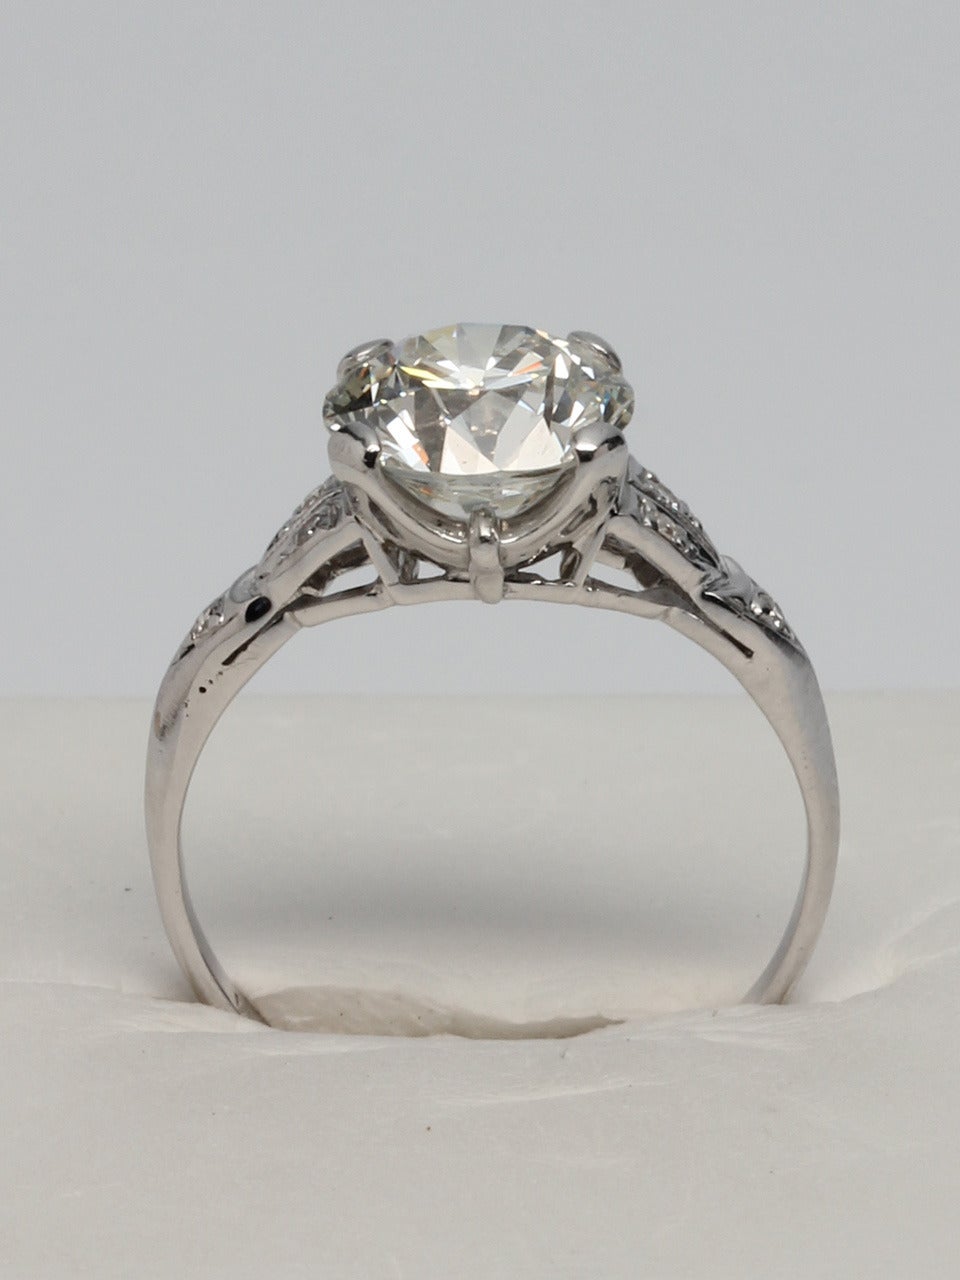 Classic Art Deco design vintage platinum engagement ring set with 2.05ct transitional cut center diamond, EGL Certified, I/VS2. Six single cut side diamonds add approximately 0.12ct. Geometric side motifs, open galleries and elevated center stone